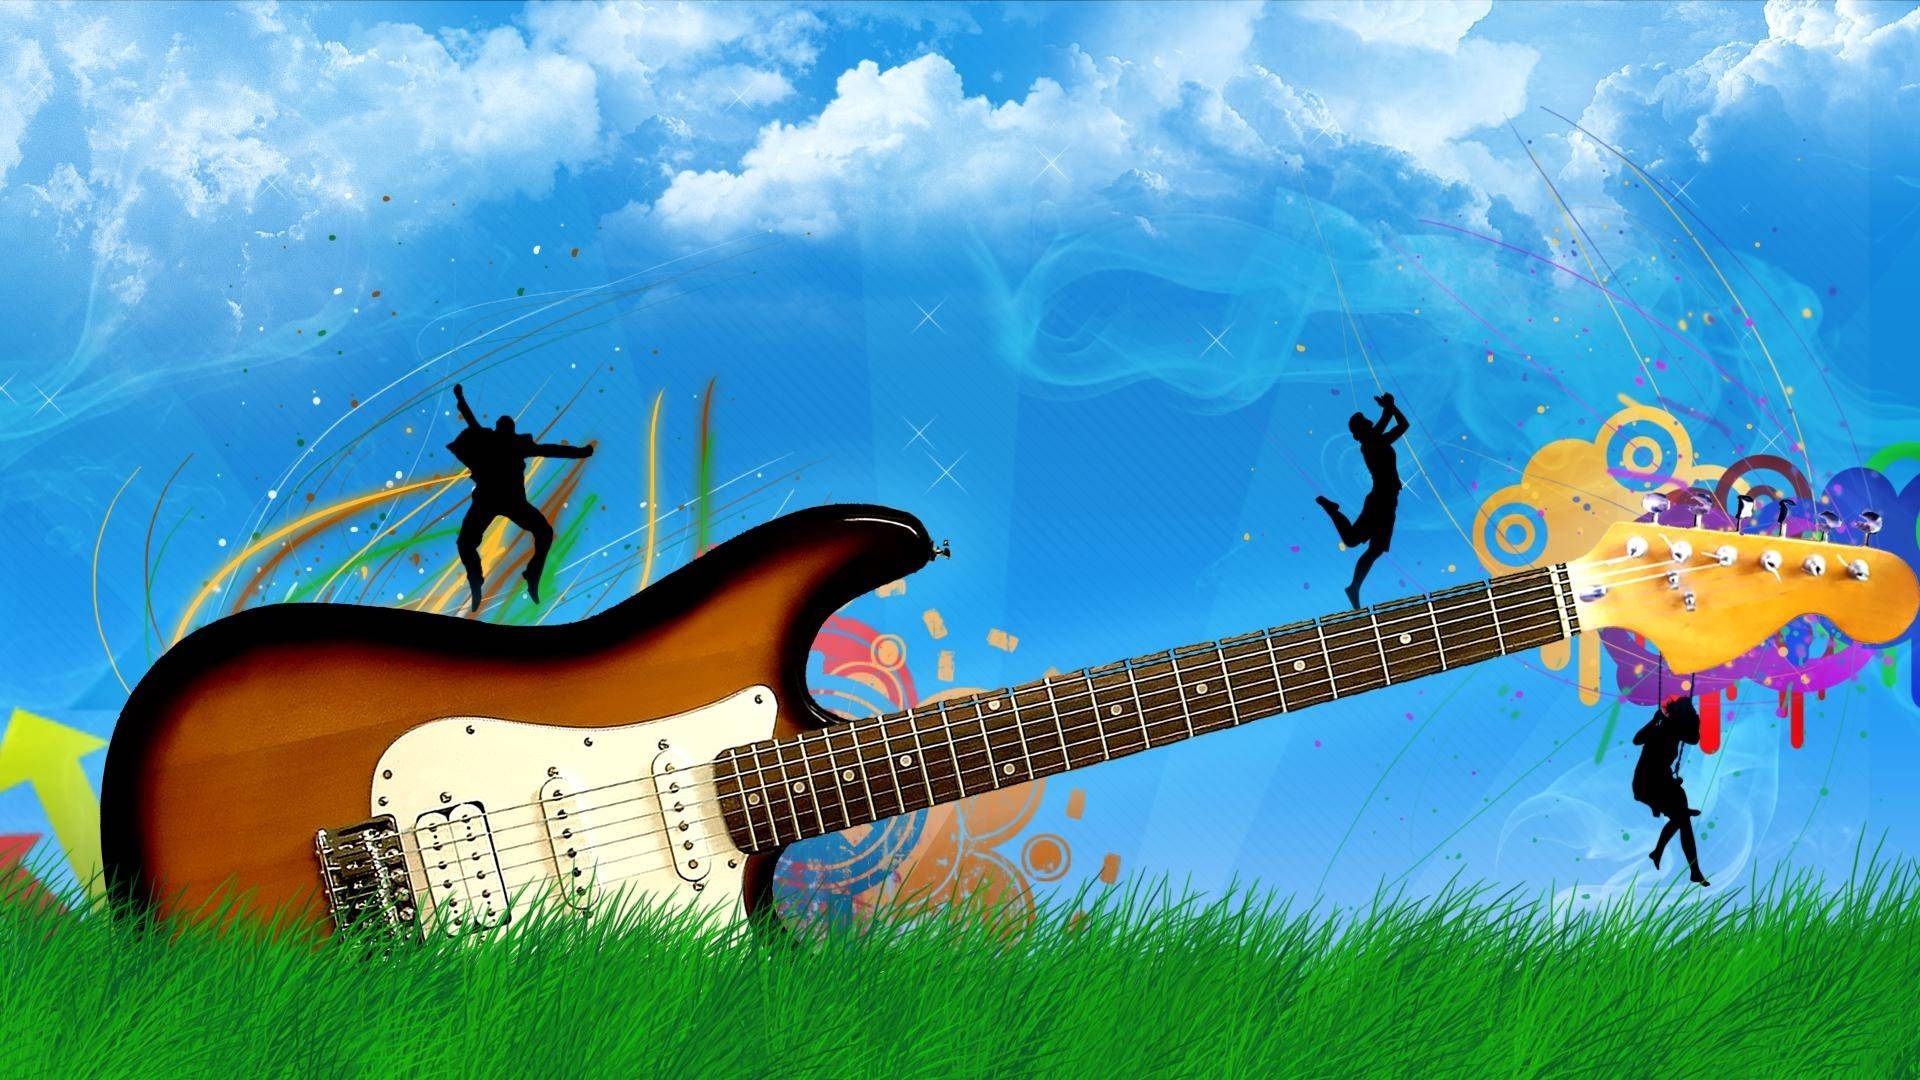 Download Cute Music Electric Guitar With Silhouettes Wallpaper | Wallpapers .com